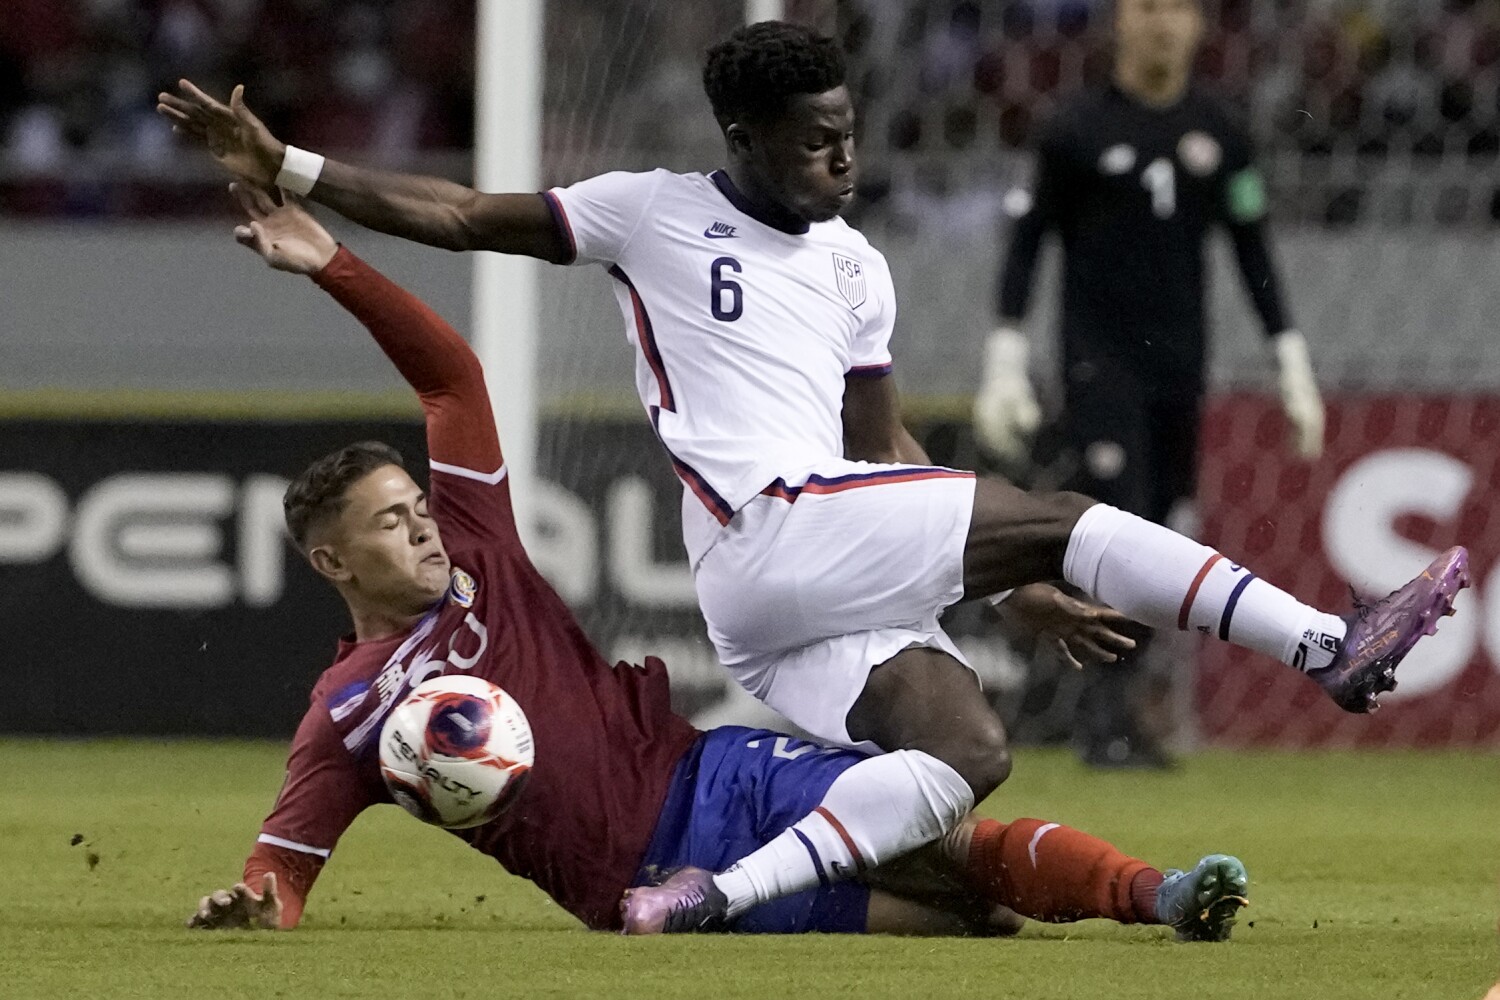 U.S. men's soccer qualifies for World Cup despite 2-0 loss to Costa Rica